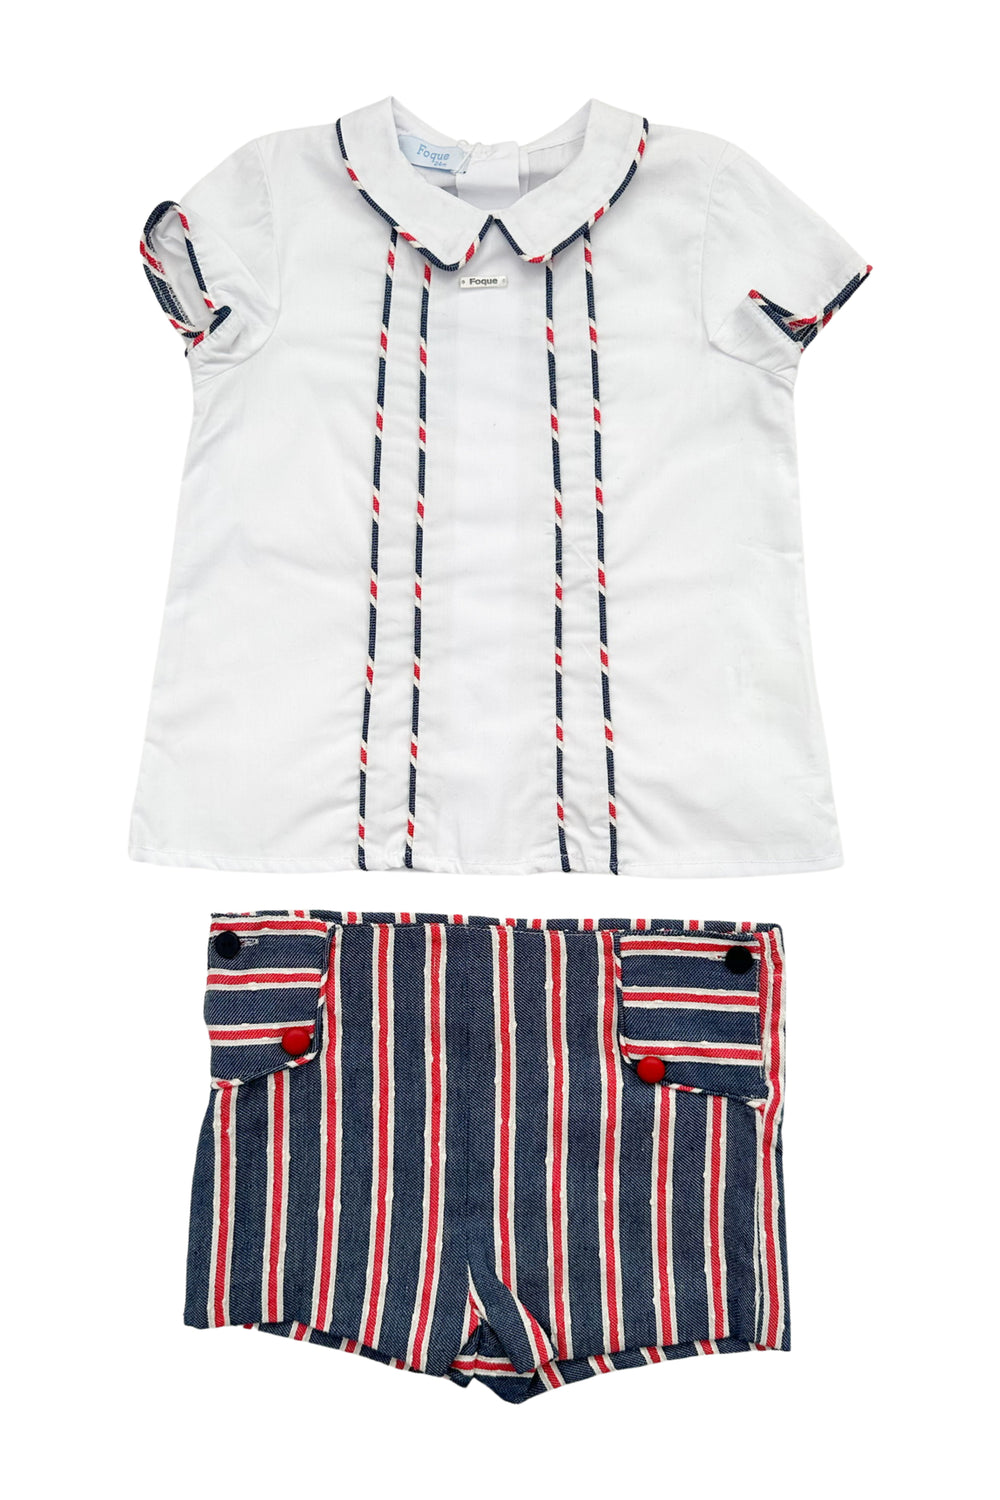 Foque PREORDER "Oliver" Navy & Red Striped Shirt & Shorts | Millie and John